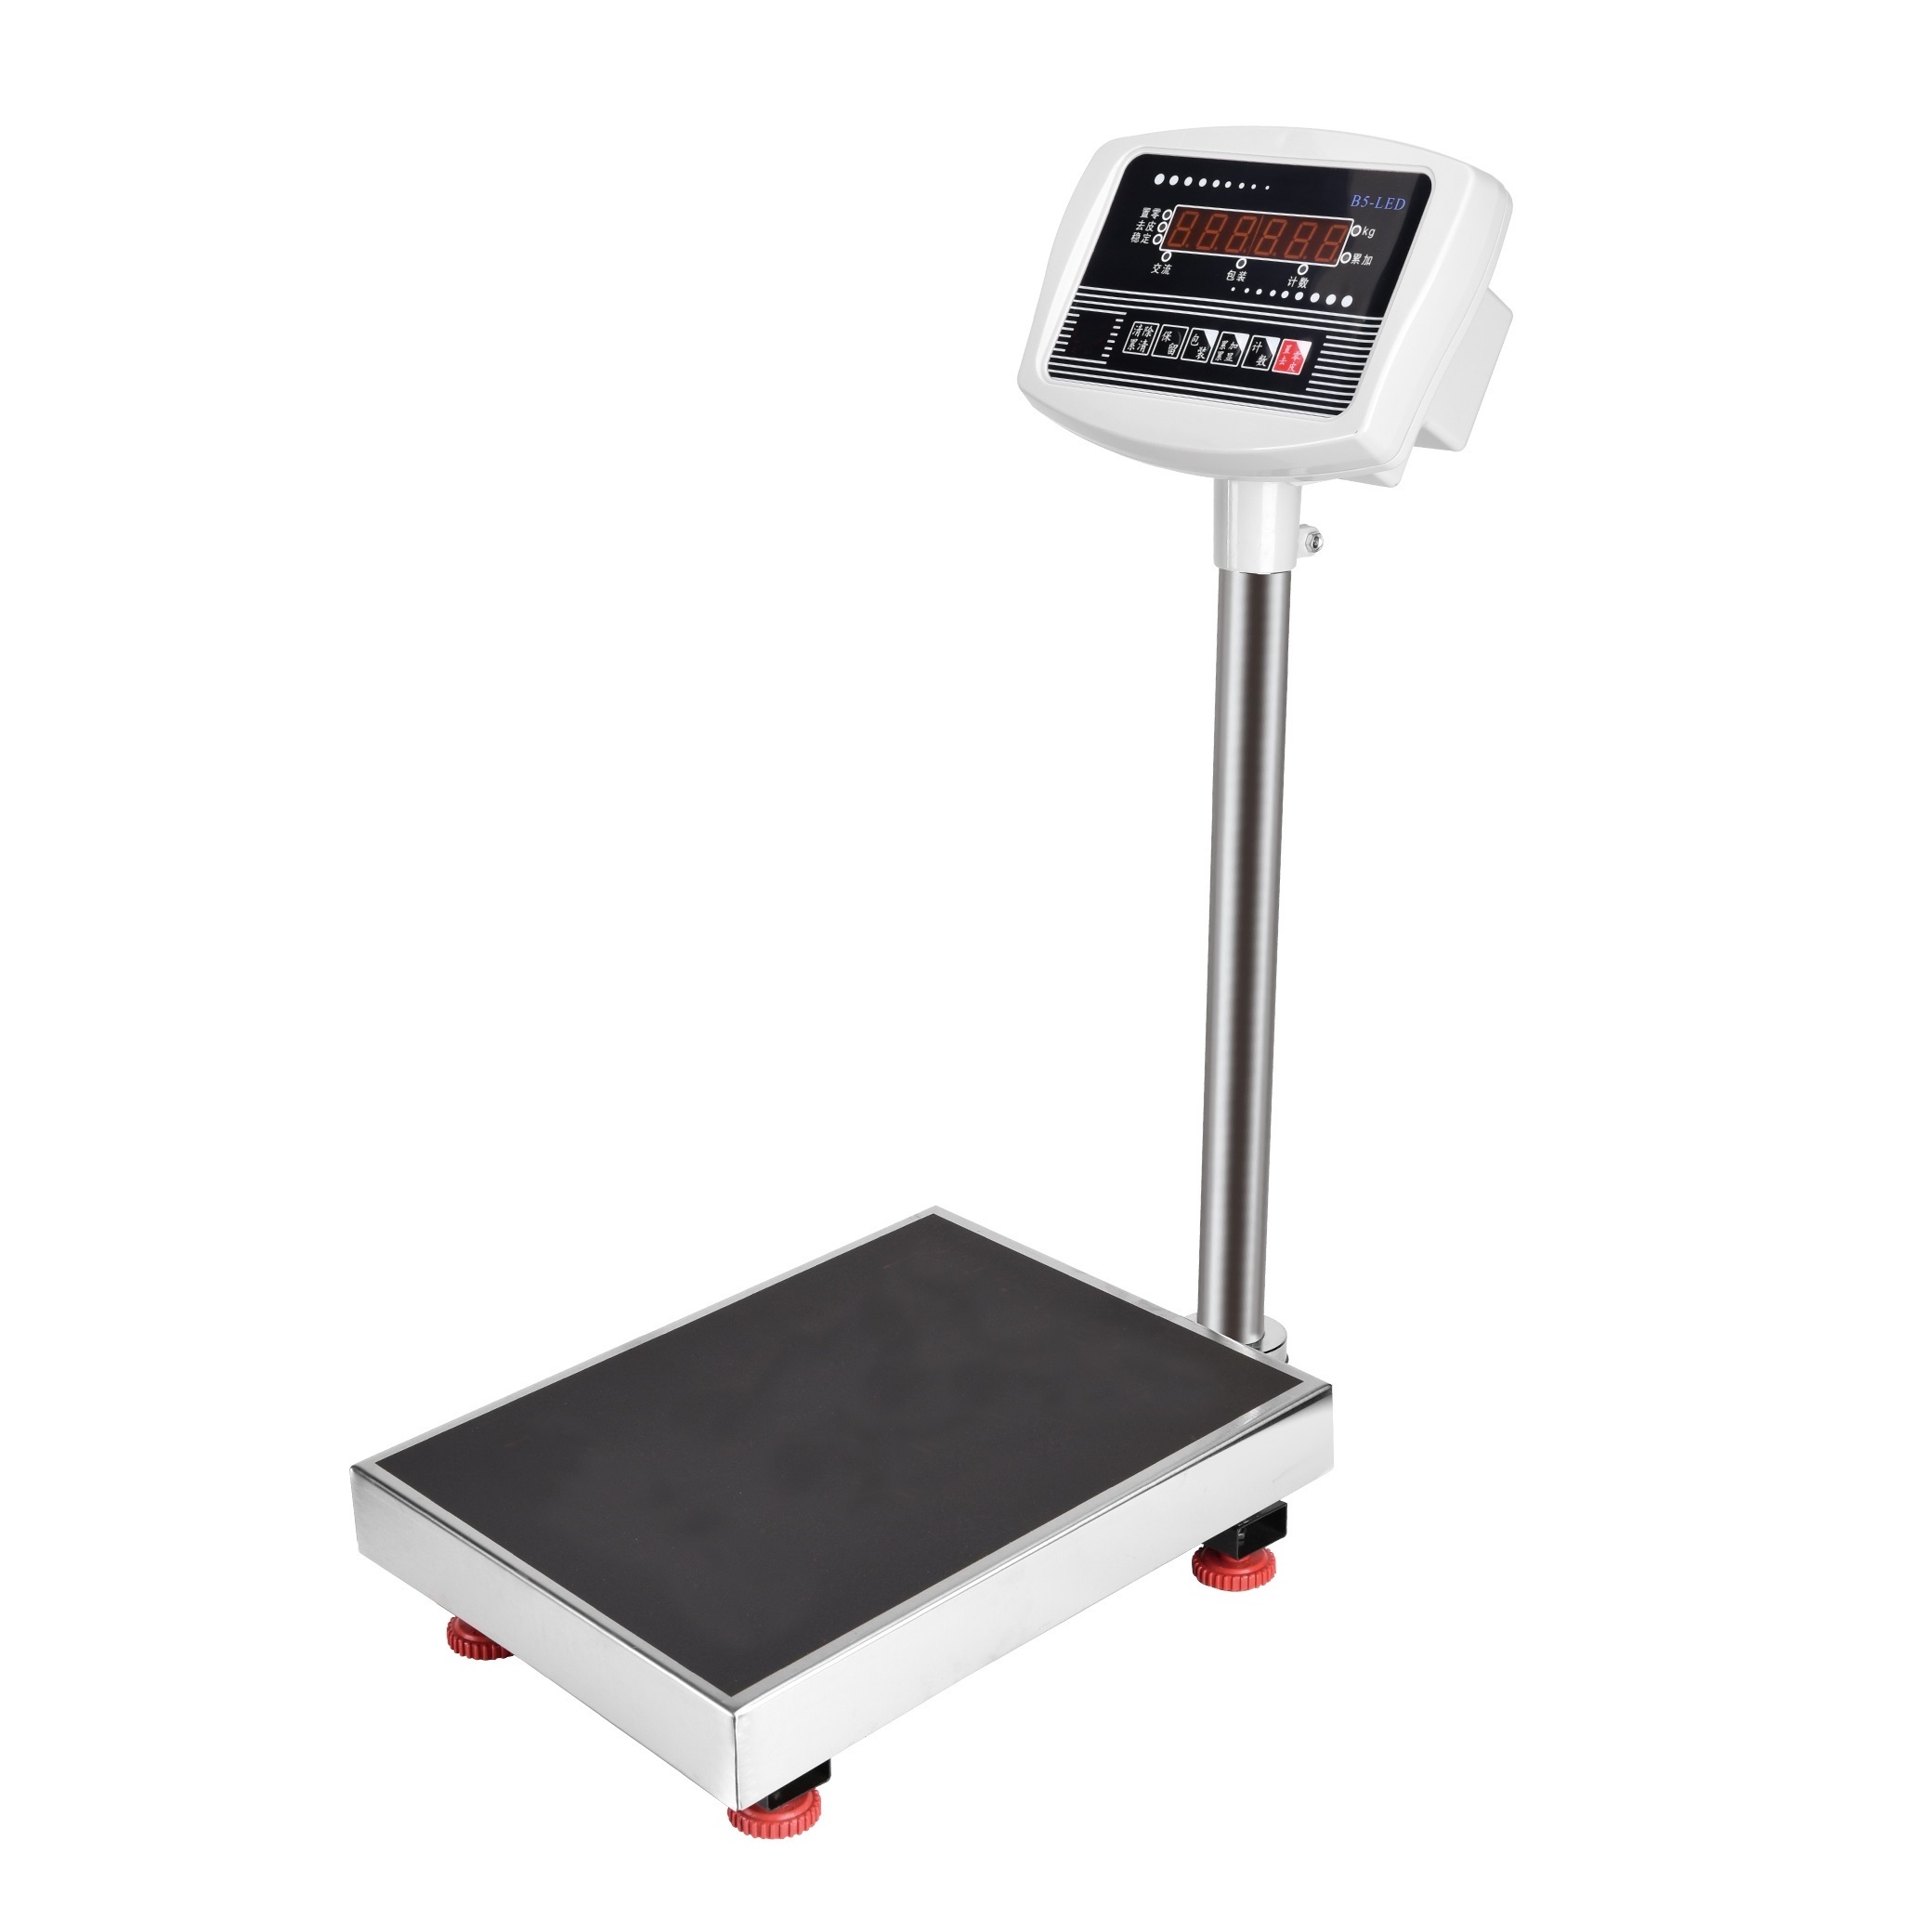 Commerical Weigh Scale Platform Instrument China Factory Sale Industrial Electronic Digital Platform Scale